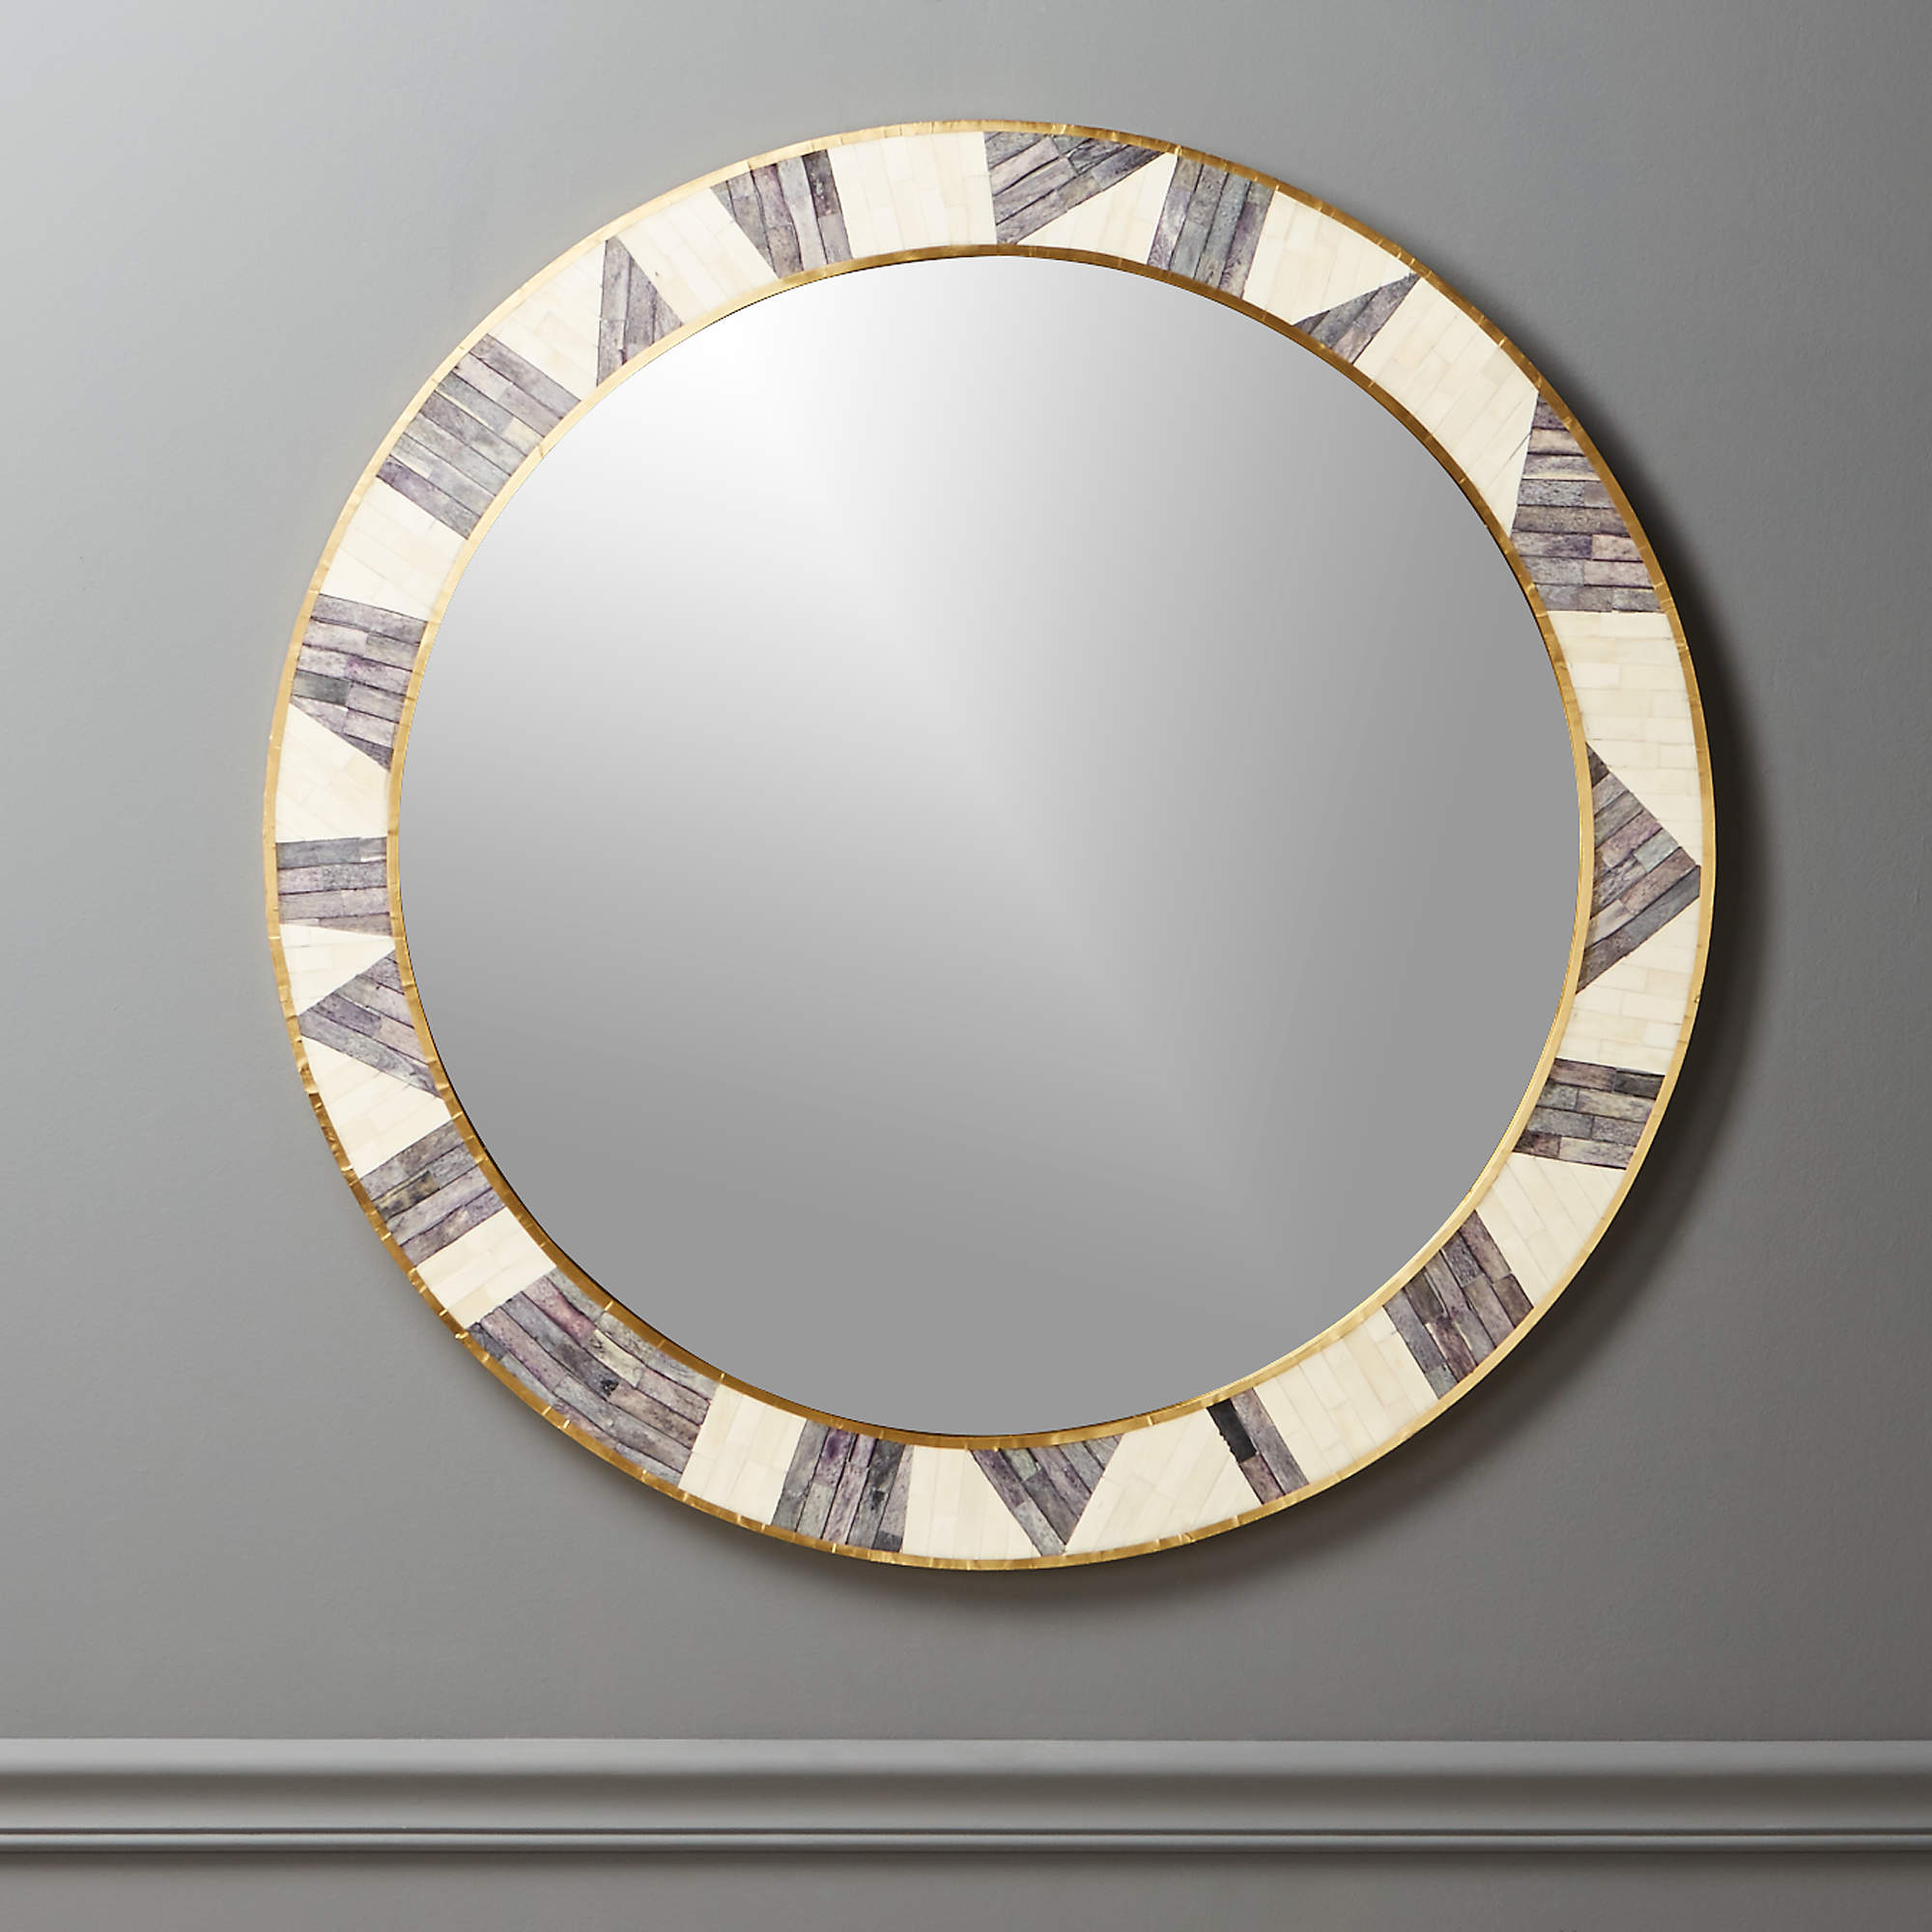 Shop GRACE BONE INLAY ROUND WALL MIRROR 32" | Quantity: 1 from CB2 on Openhaus